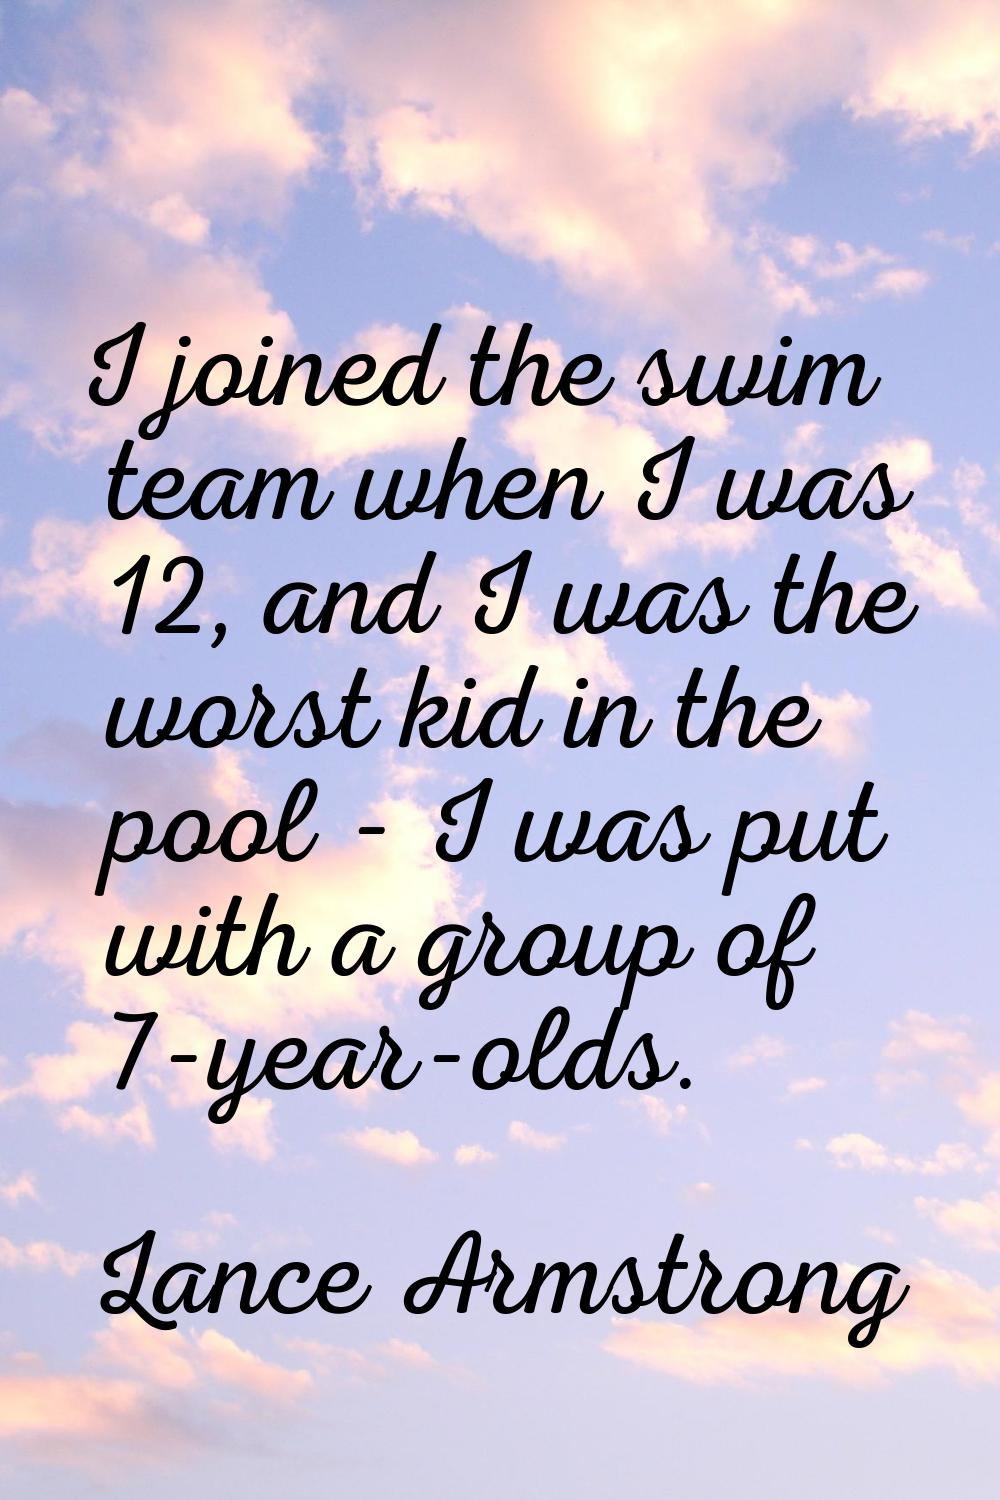 I joined the swim team when I was 12, and I was the worst kid in the pool - I was put with a group 